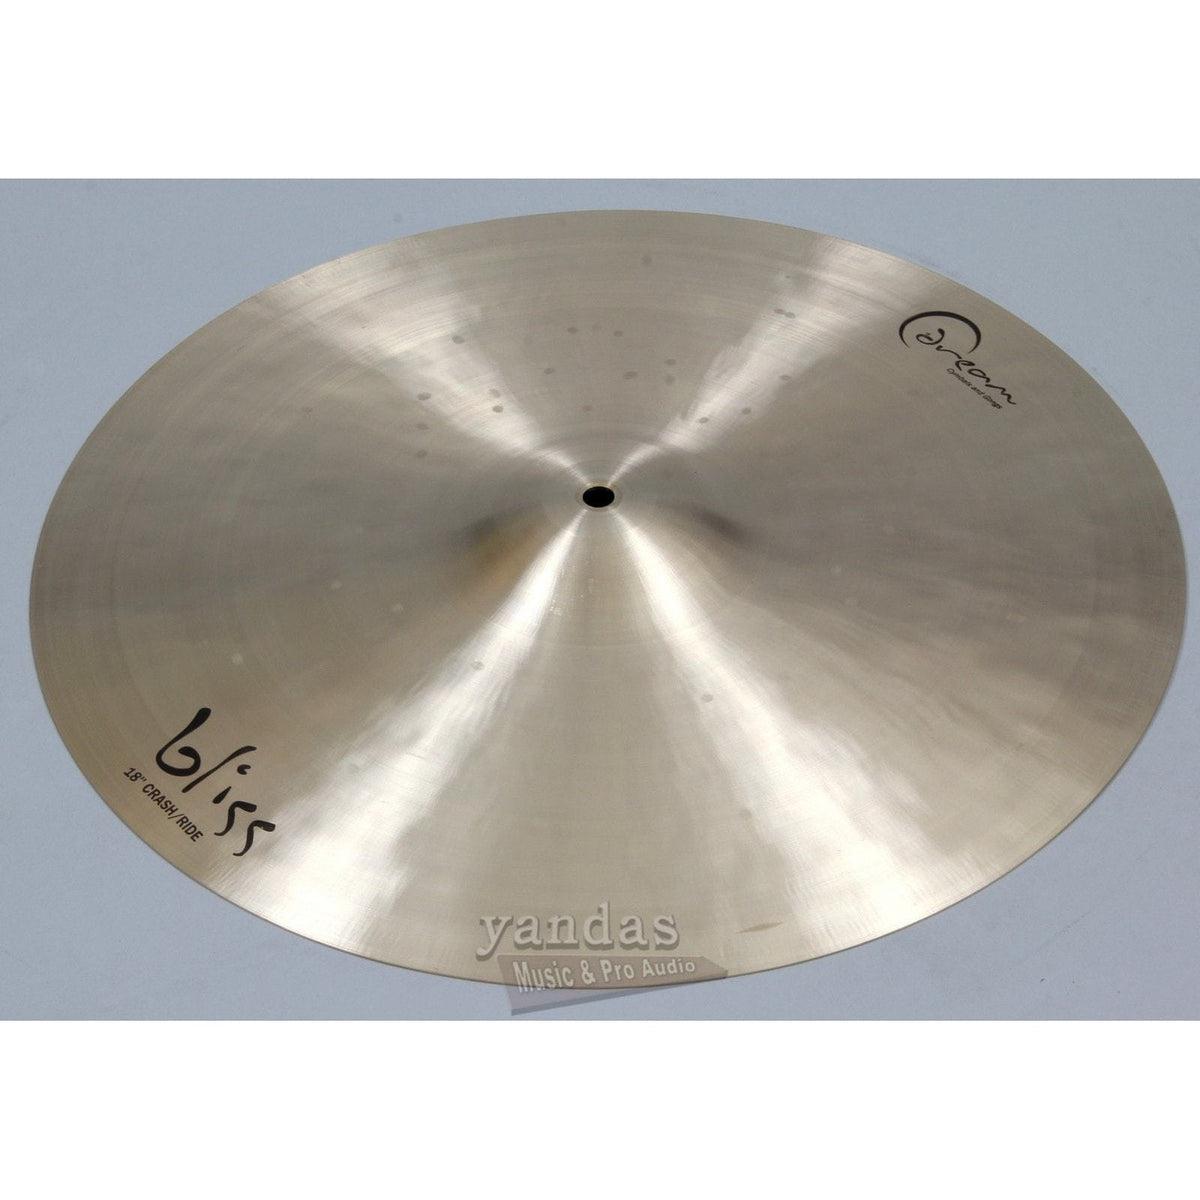 Dream Cymbals Bliss Crash/Ride Cymbal 18 Inch